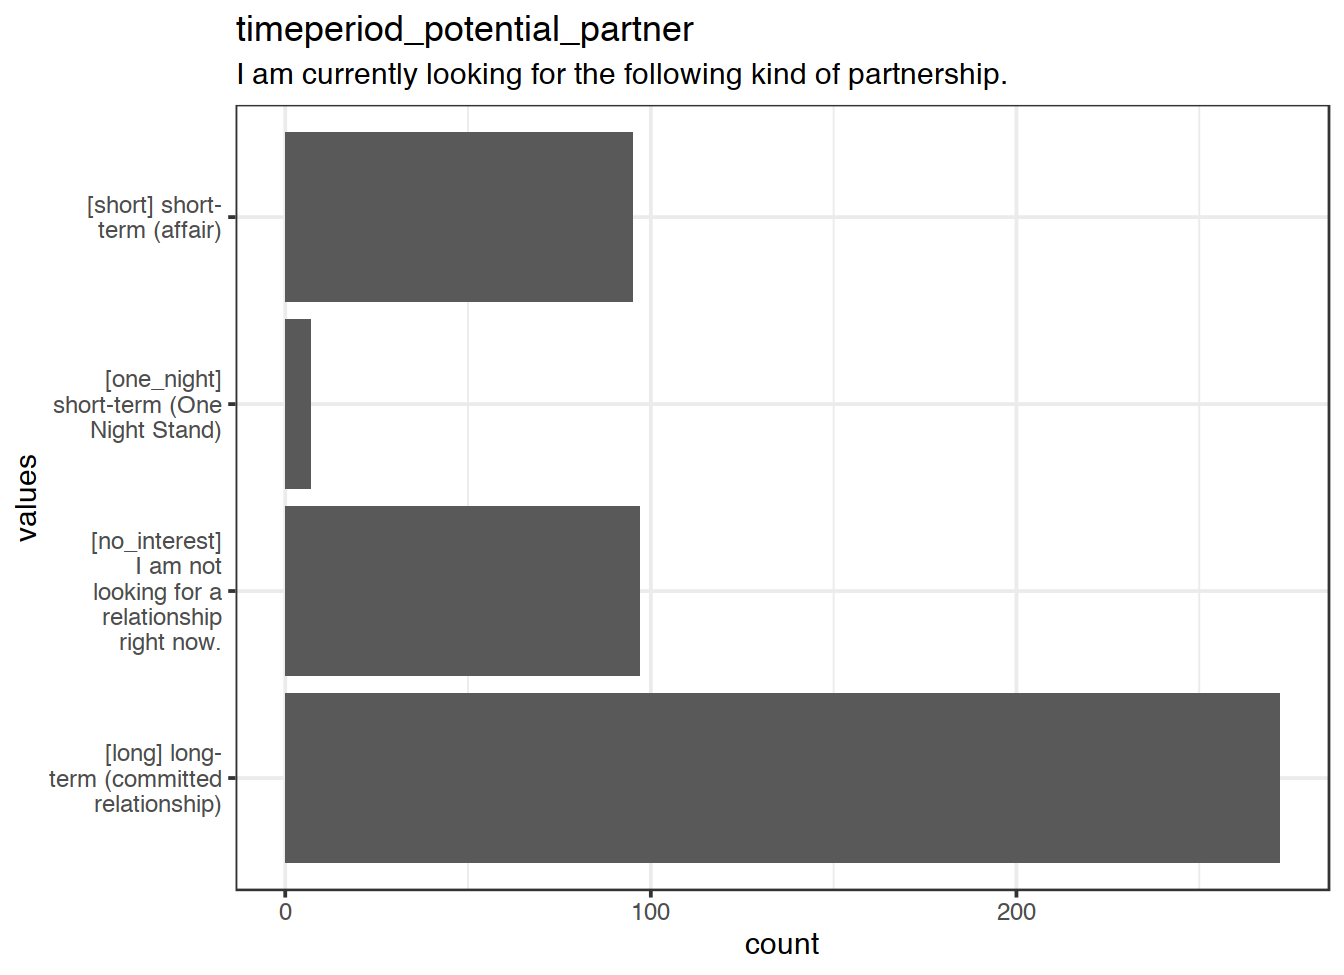 Distribution of values for timeperiod_potential_partner